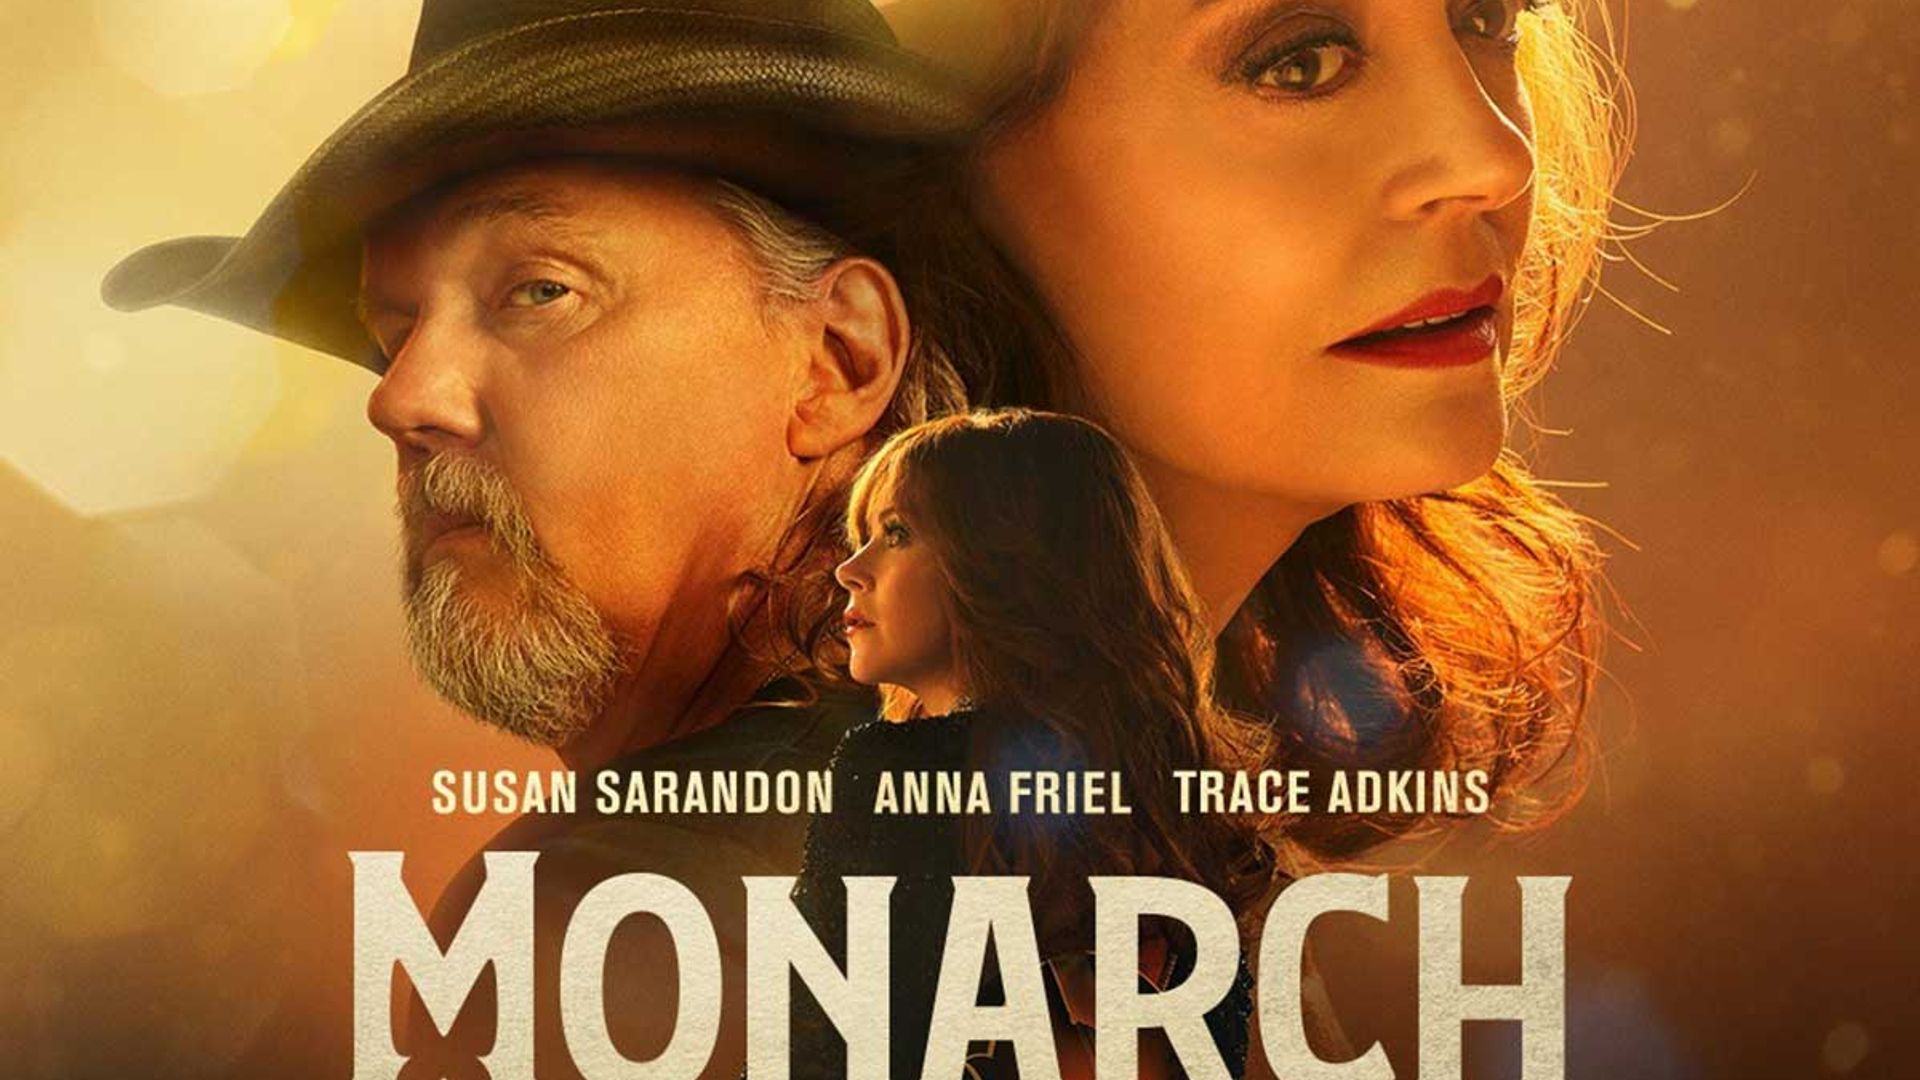 Country music fans giddy with excitement as Monarch finally gets a